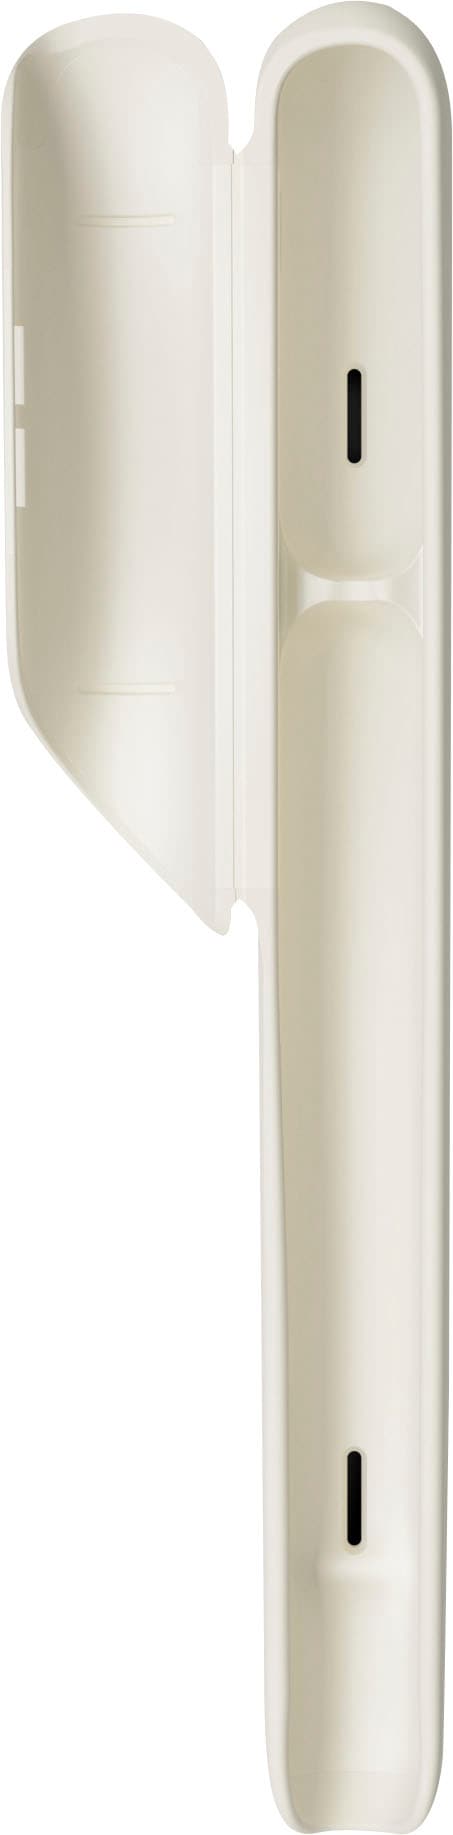 Philips Sonicare - Philips One by Sonicare Rechargeable Toothbrush - Snow_7